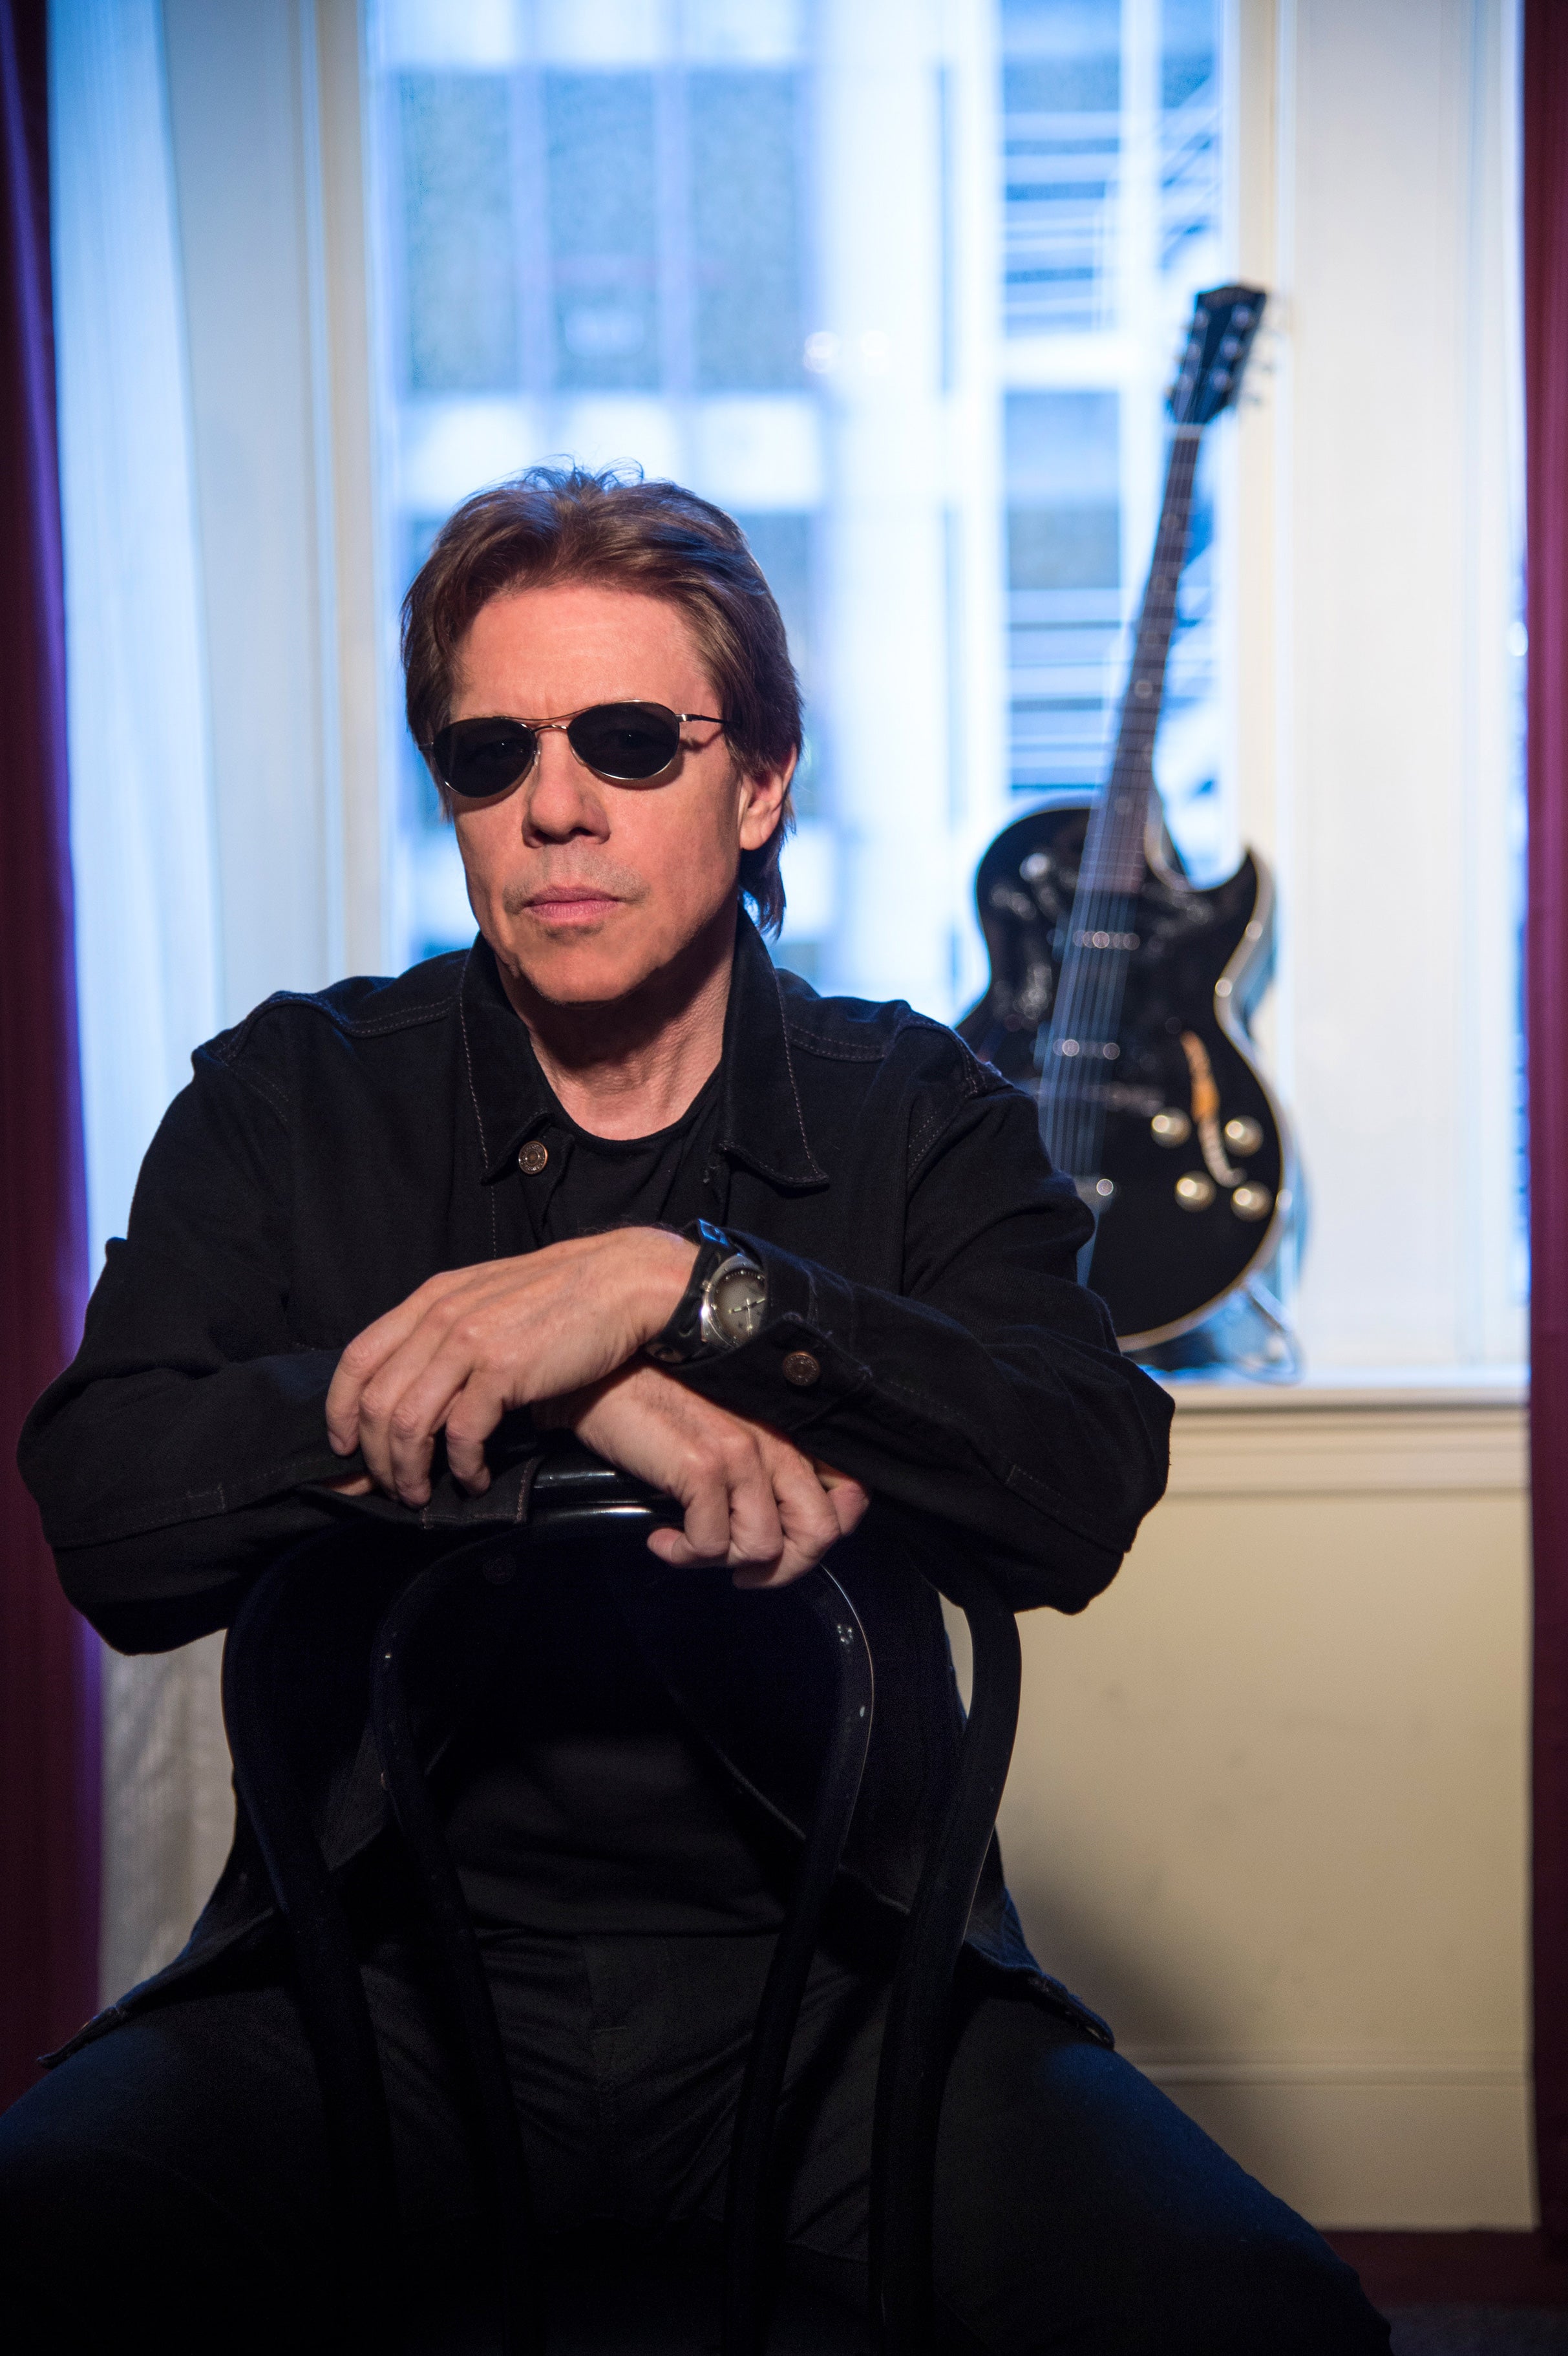 GEORGE THOROGOOD and THE DESTROYERS Bad All Over The World-50 Years  free presale code for early tickets in Denver